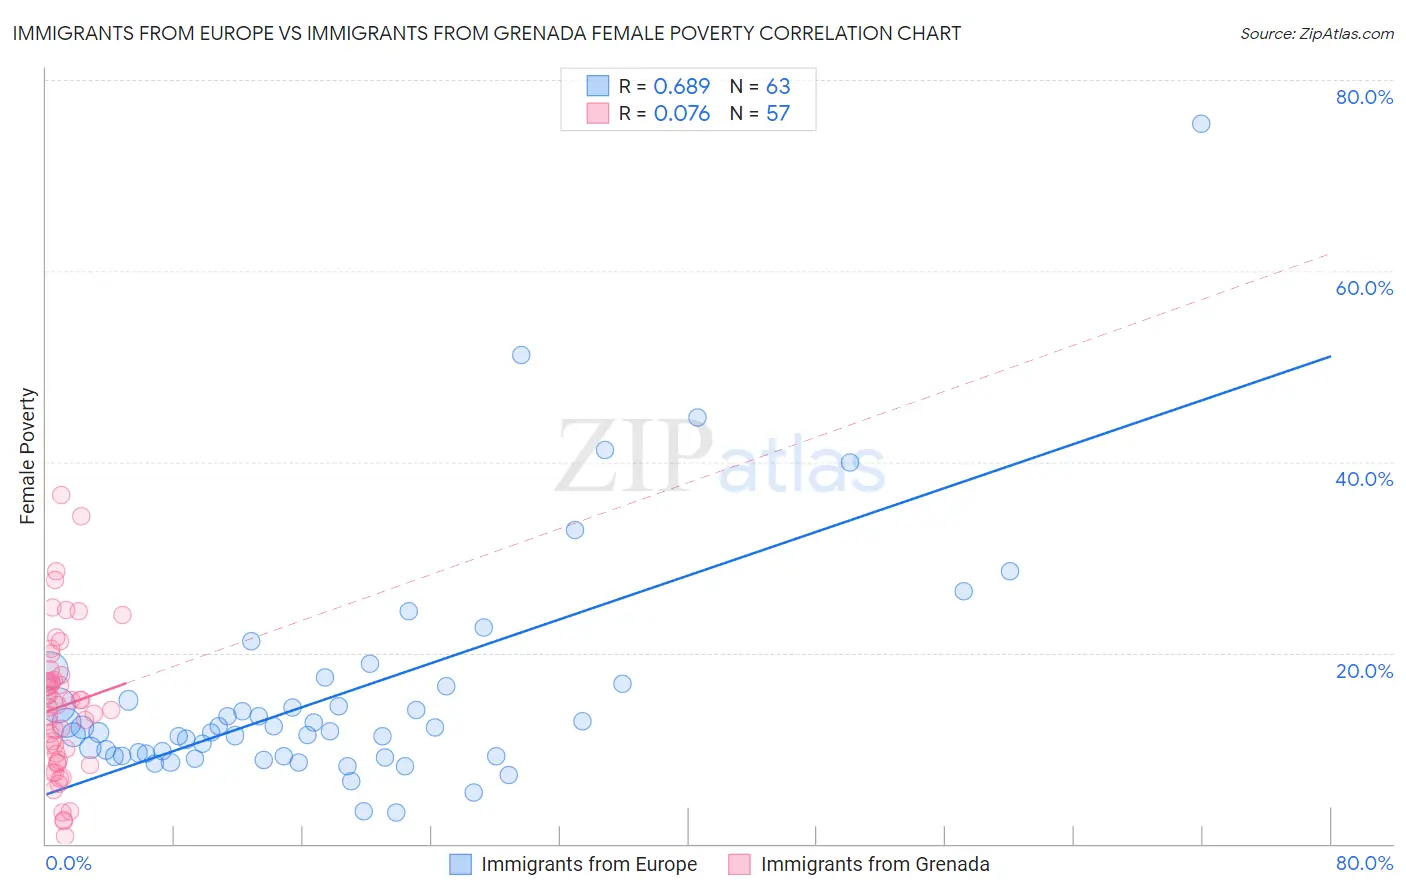 Immigrants from Europe vs Immigrants from Grenada Female Poverty